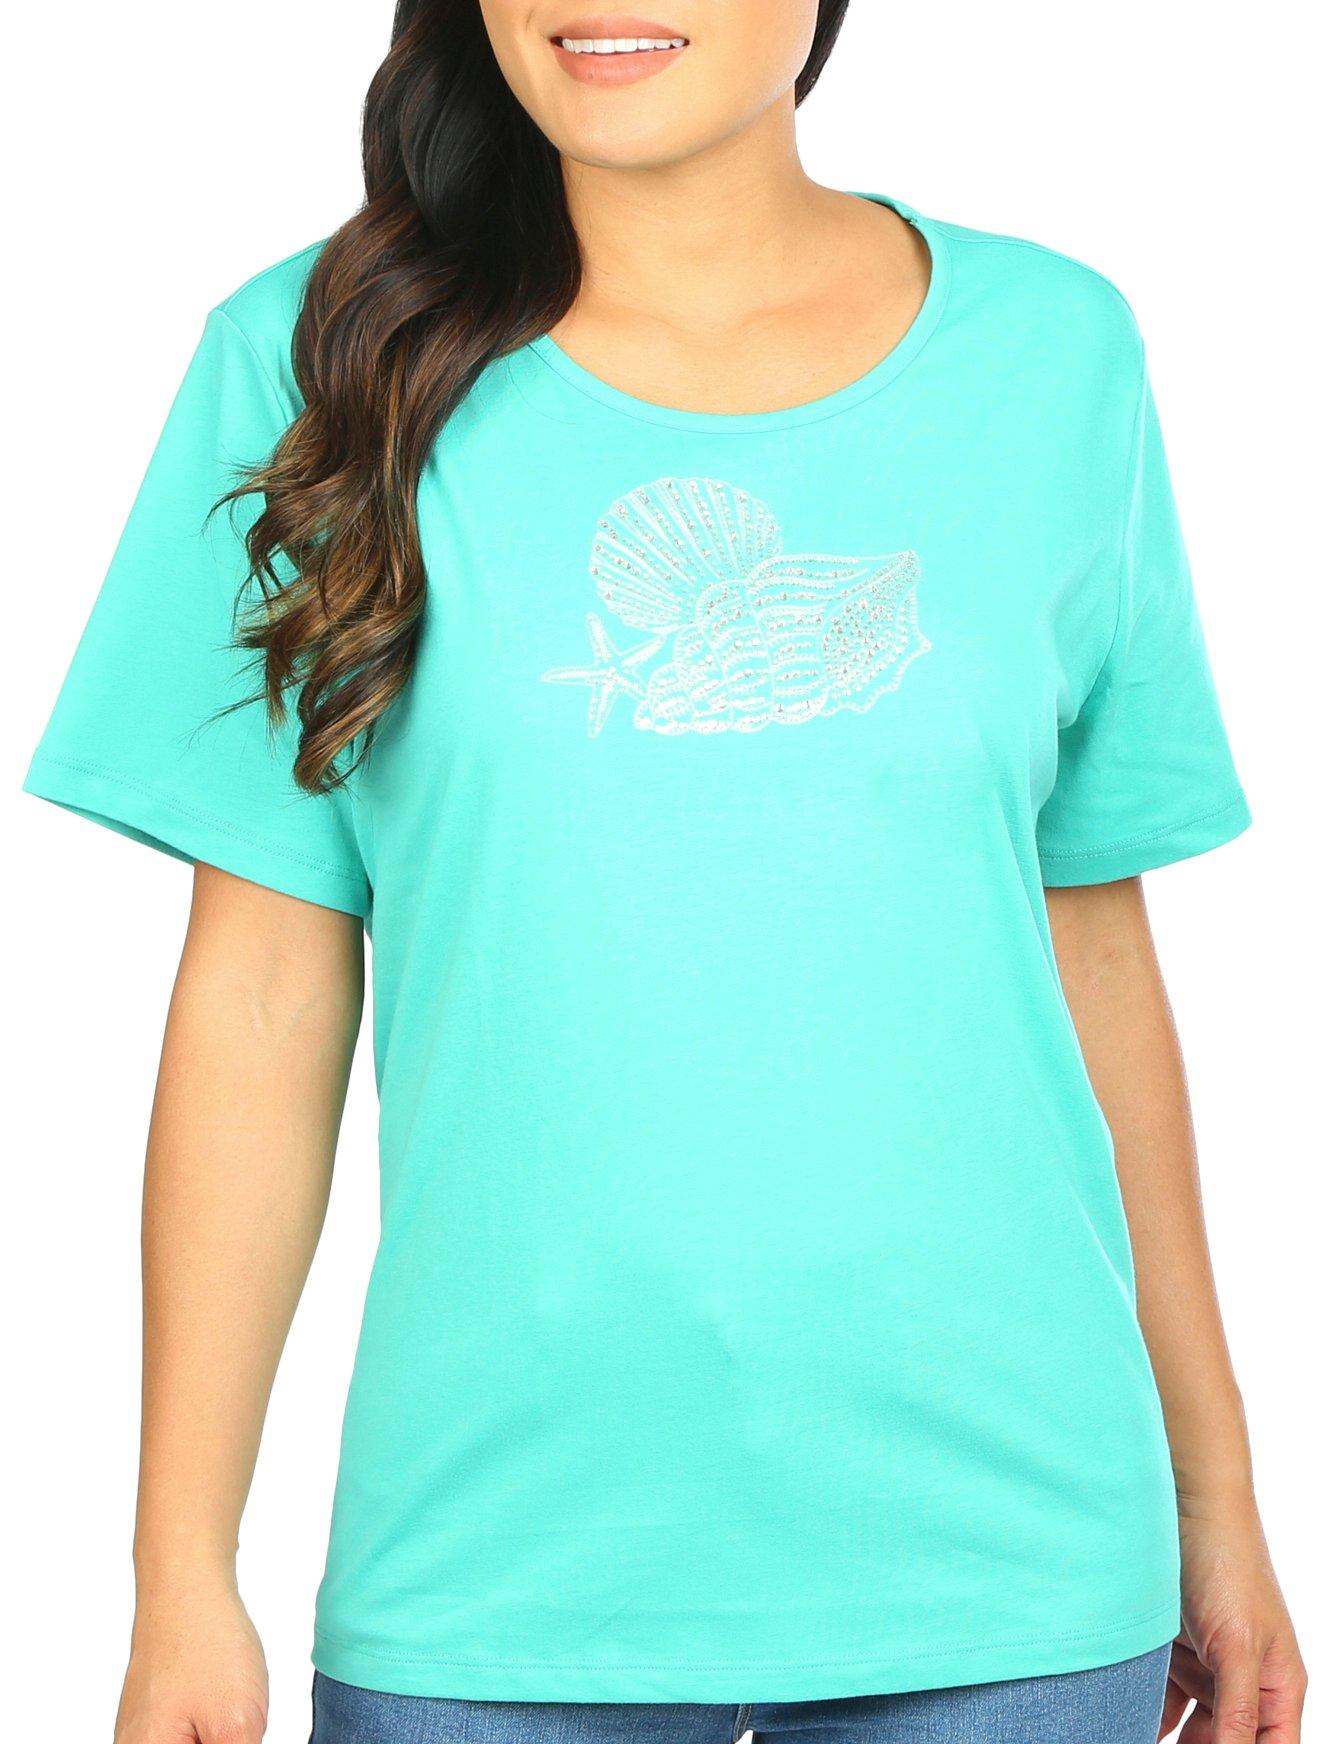 Coral Bay Petite Jewel Shell Short Sleeve Top